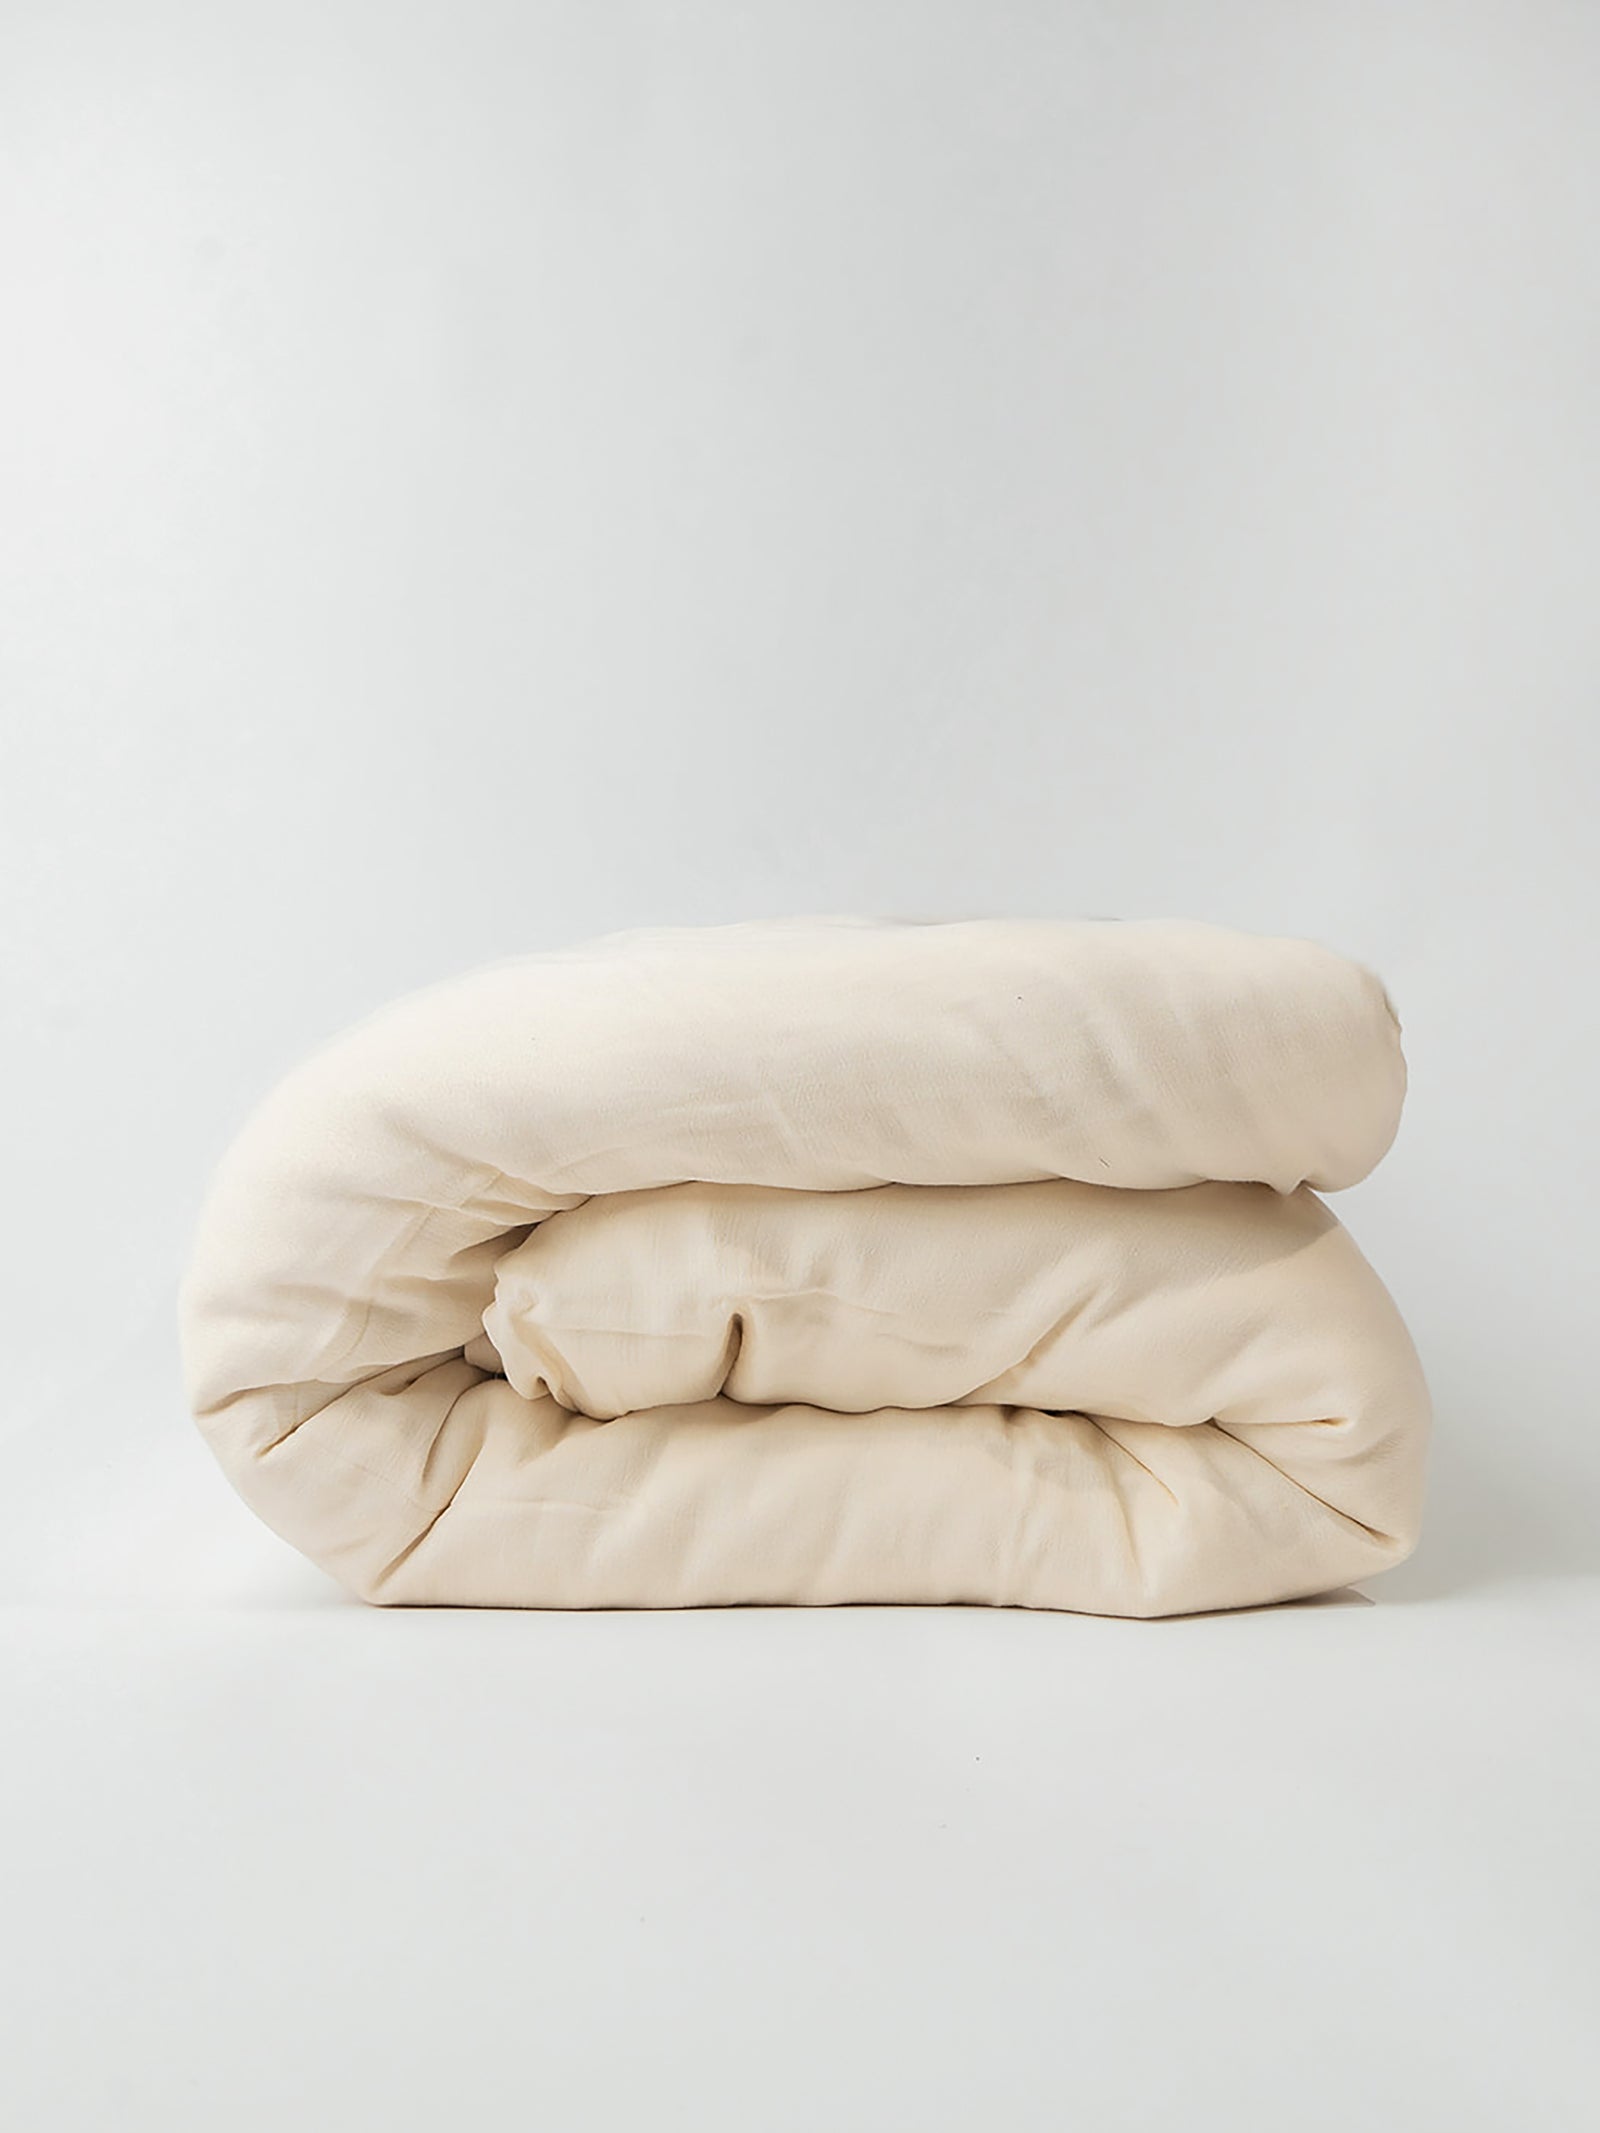 Buttermilk Aire Bamboo Duvet Cover. The Duvet Cover has been photographed with a white background.